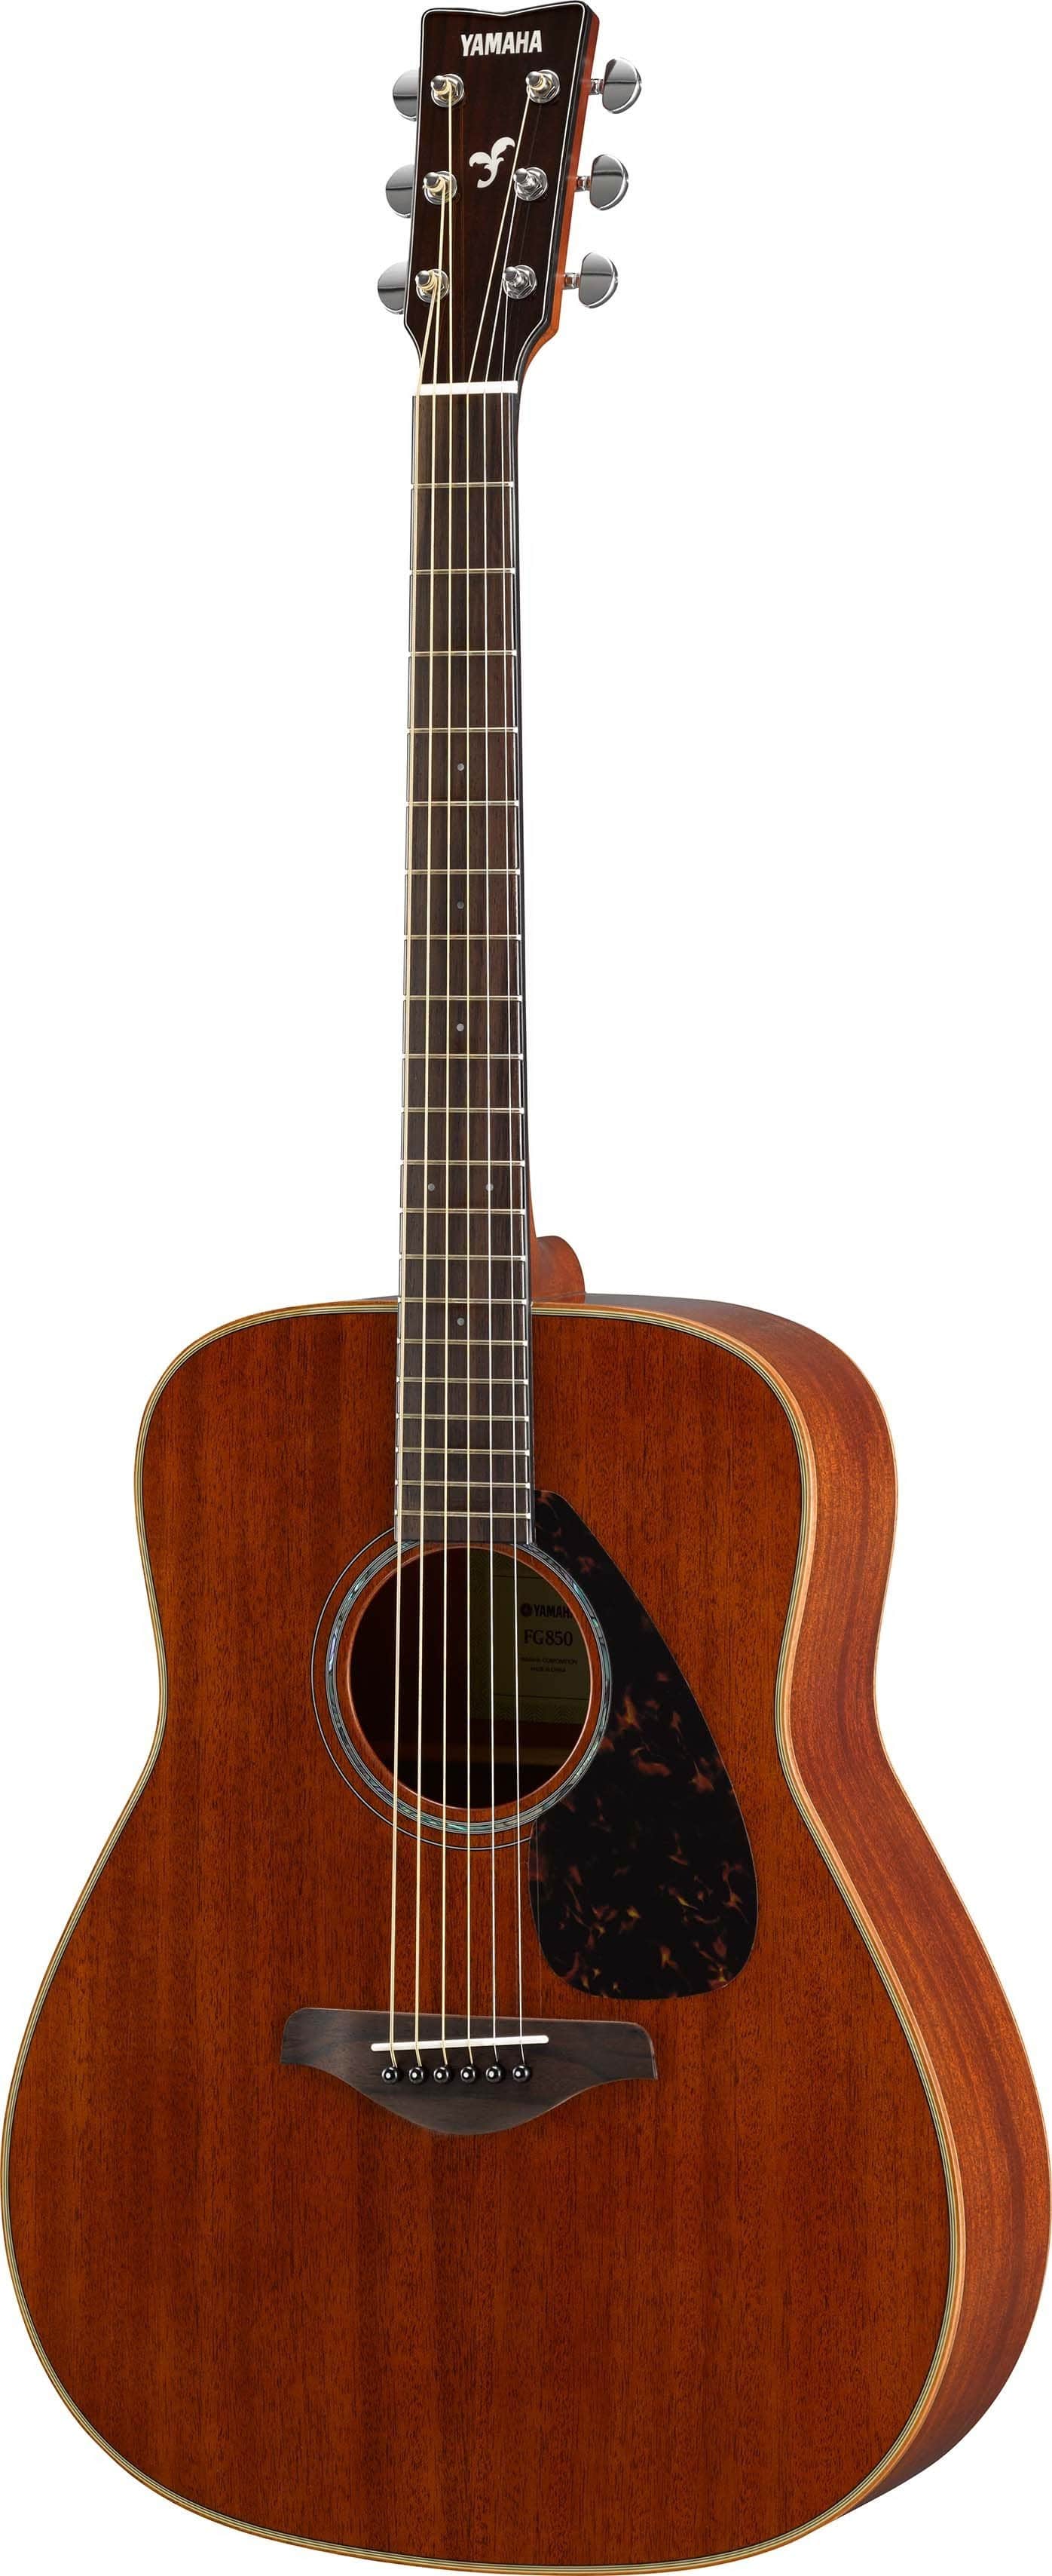 Yamaha FG850 Dreadnought Acoustic Guitar, Solid Mahogany Top, Back and Sides for sale